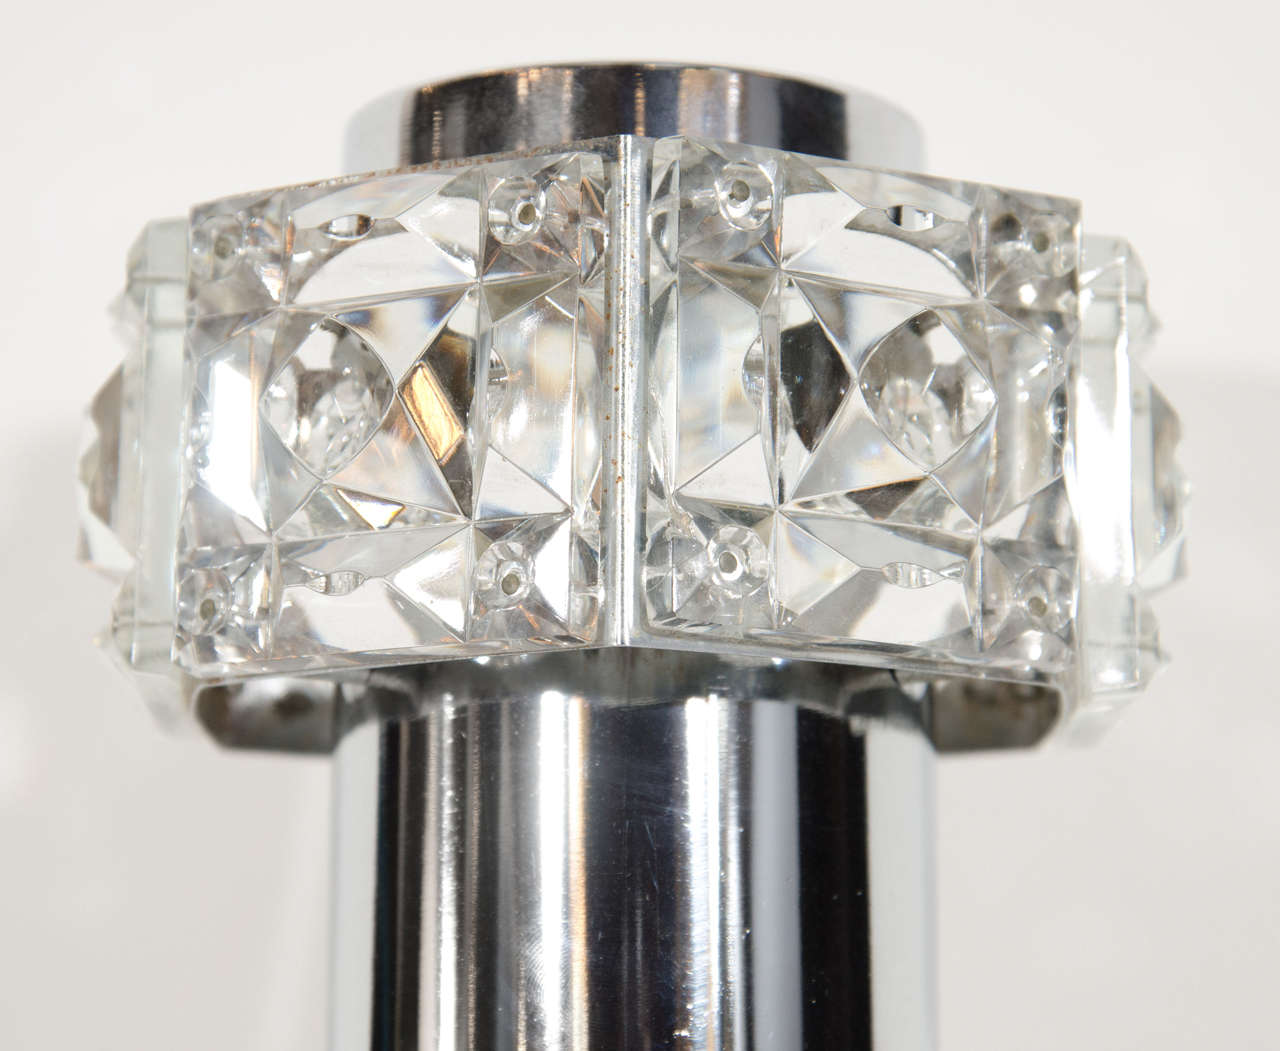 Gorgeous Austrian Mid-Century Modern sconce with barbell form. The sconce has a chrome frame with cut crystal faceted glass details. The sconce is fitted with two lights, one uplight and one downlight. While illuminated the sconce also casts light